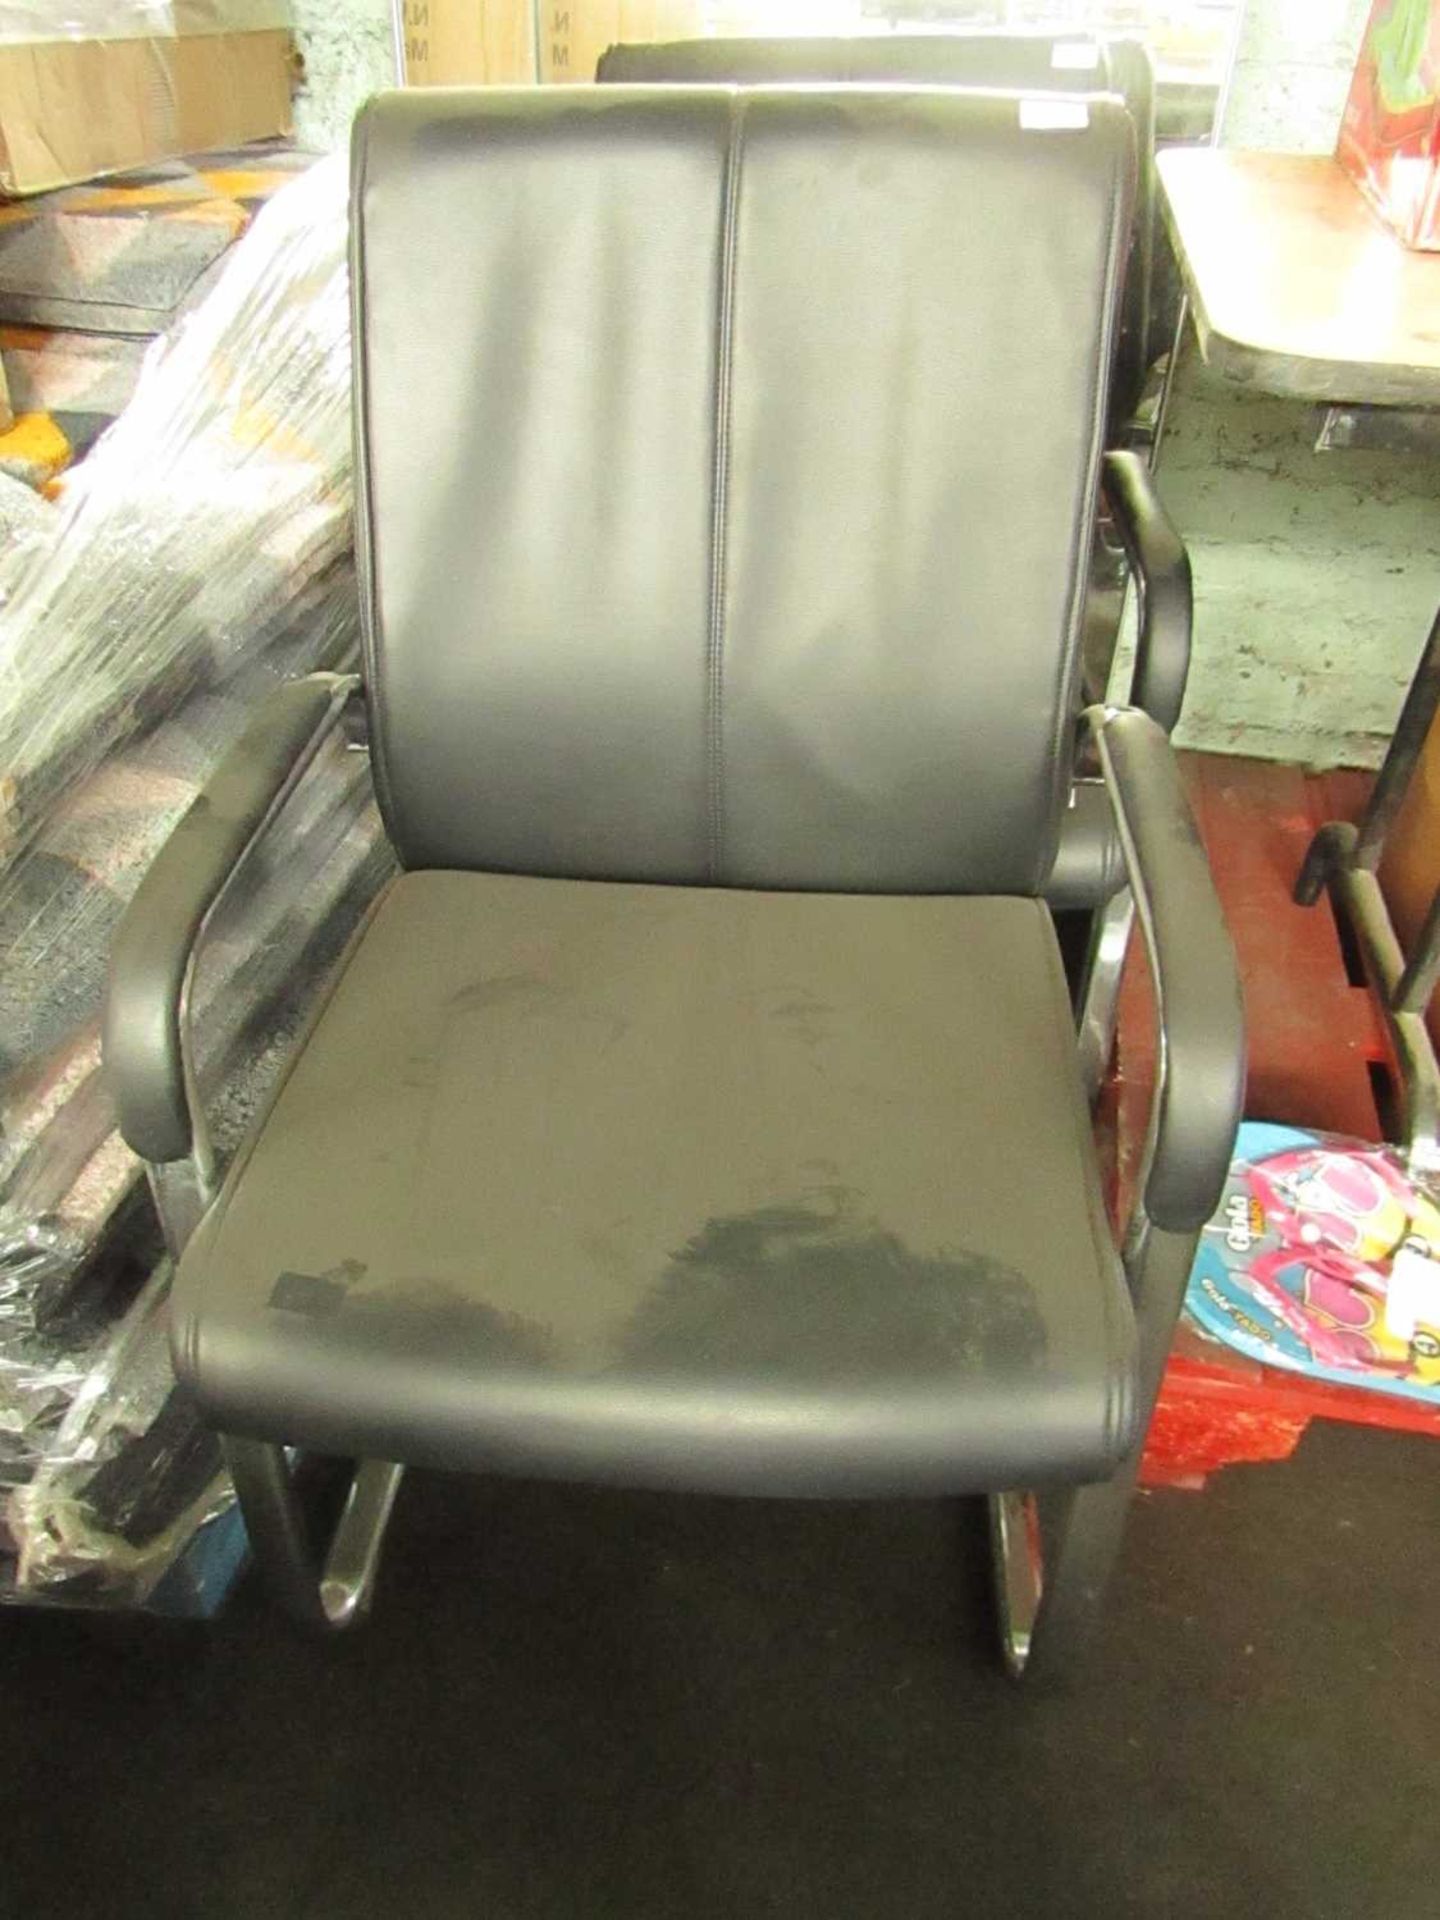 VAT Unbranded - Black Leather & Chrome Cantilever Guest Chair - Good Condition, No Packaging. RRP